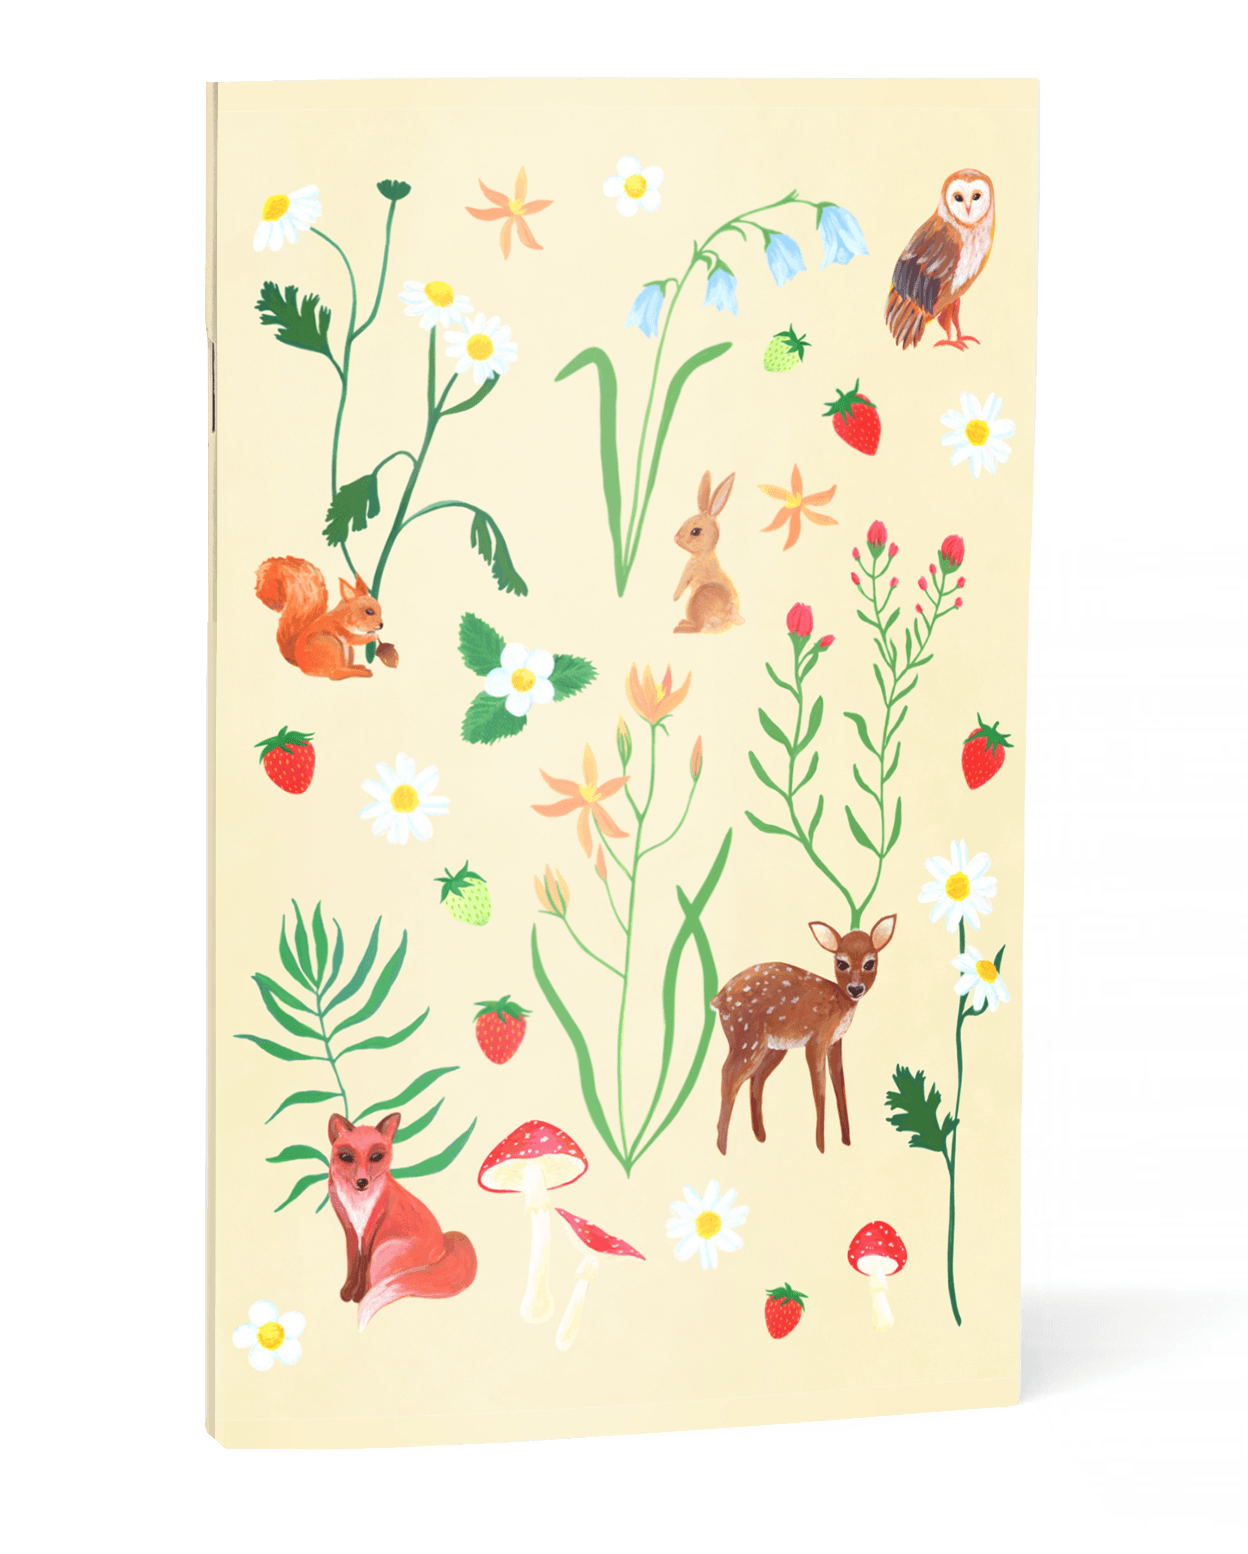 Forest creatures design with forest flowers, an owl, fox, fawn, rabbit, squirrel, mushrooms and strawberries in various array printed on a cream colored background.